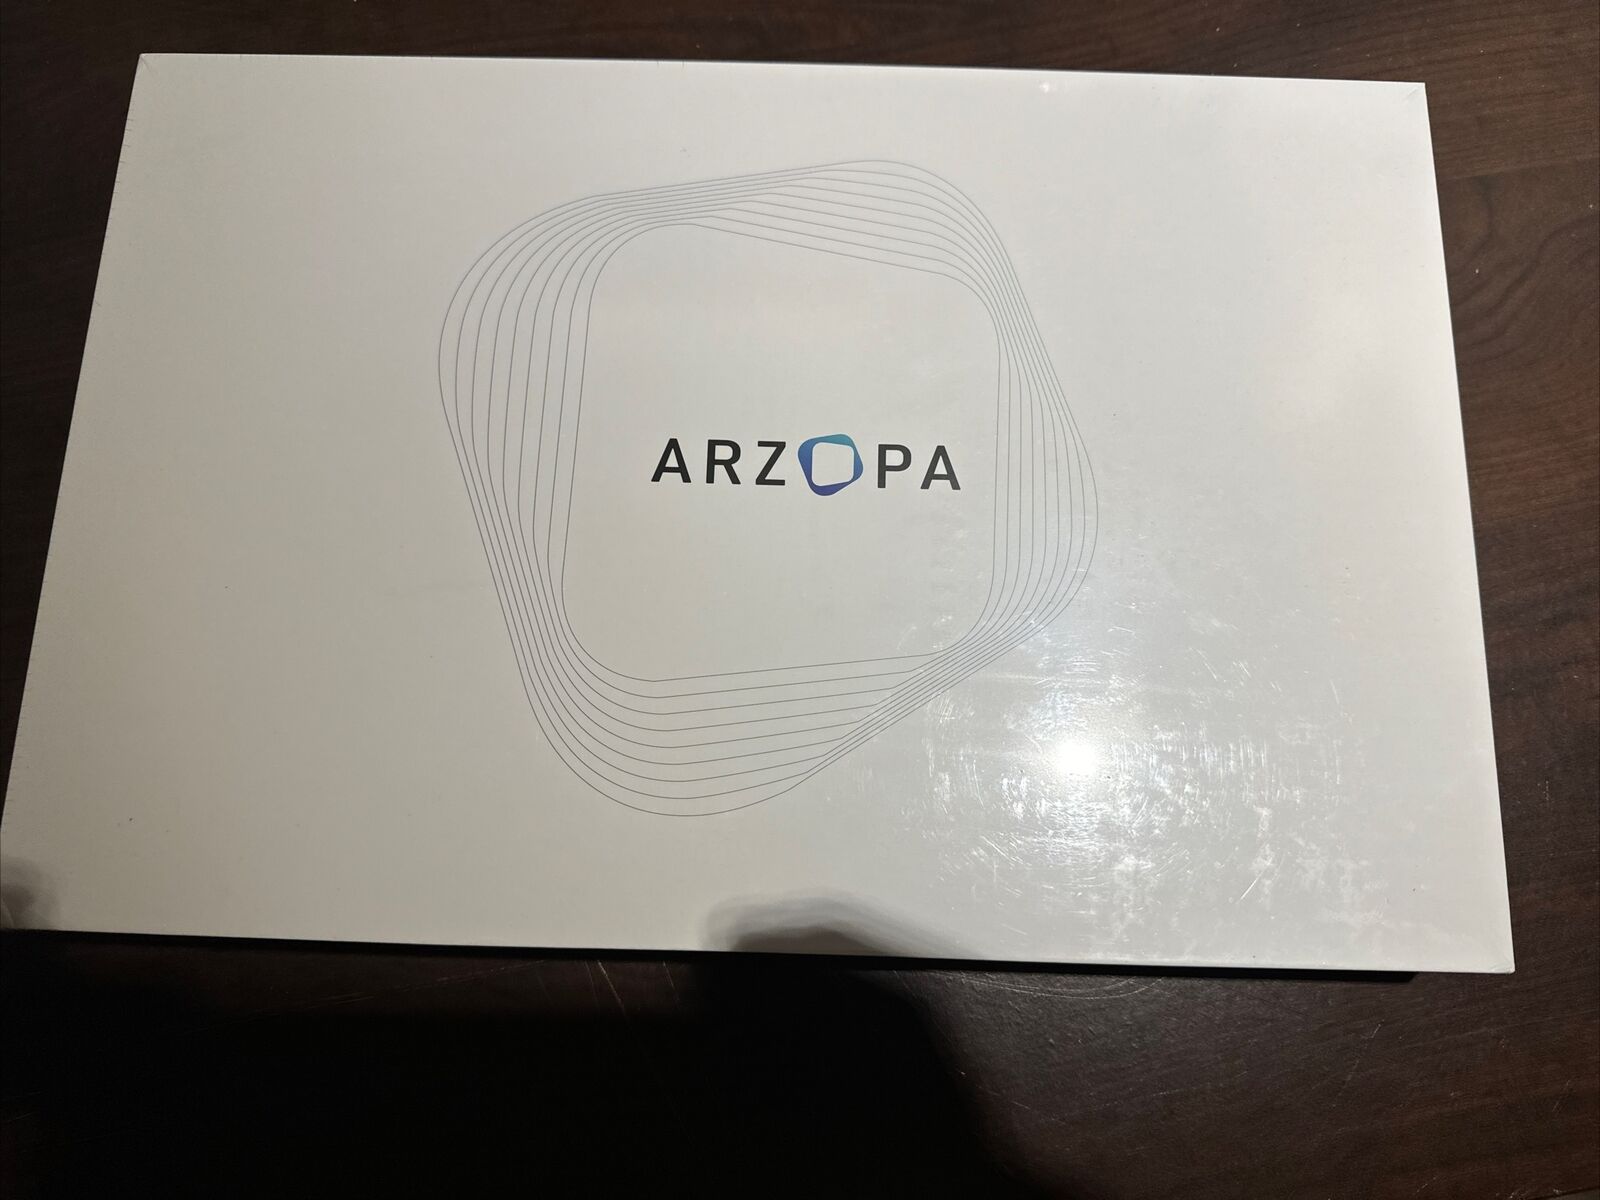 Arzopa 15.6 inch Widescreen 1080P Full HD LCD Monitor (S1-Table)